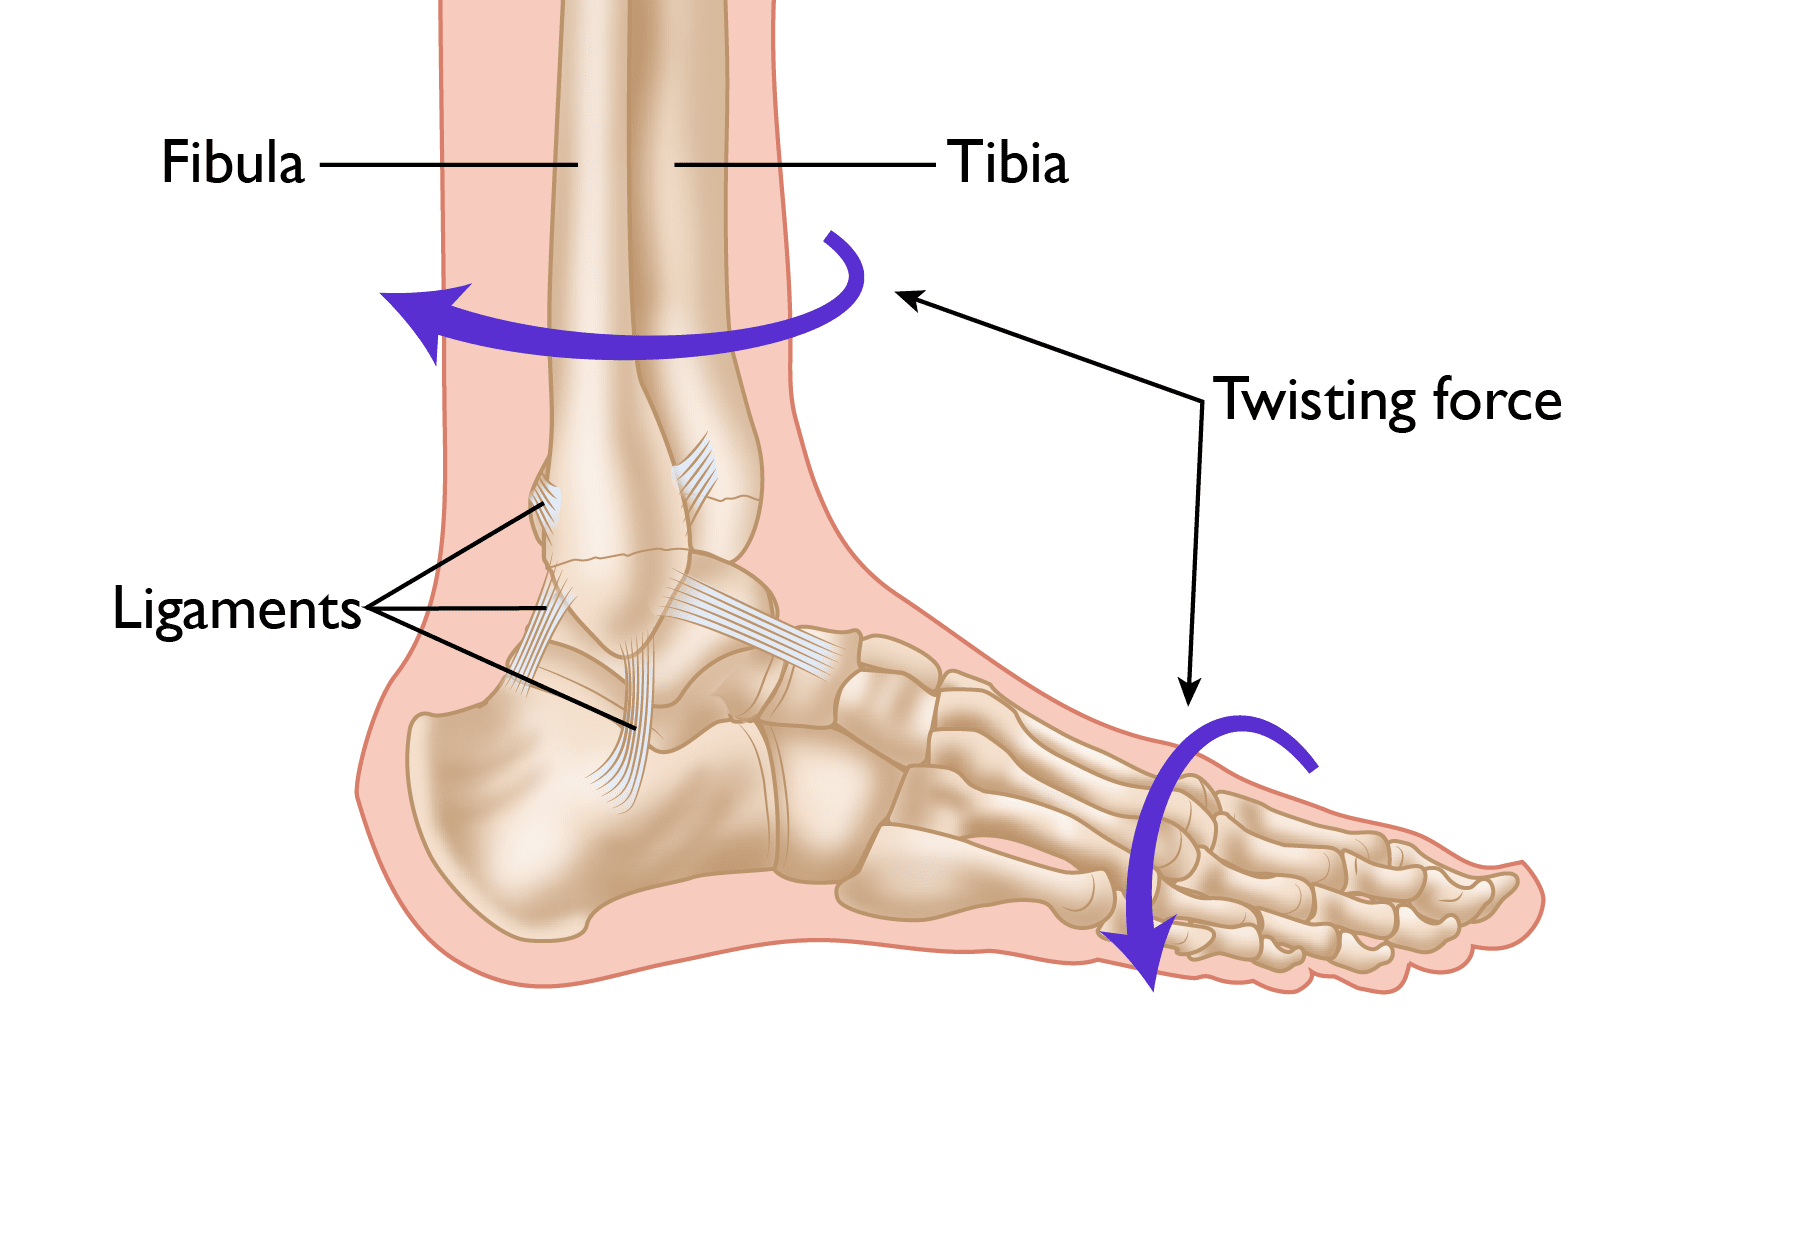 twisting force causing ankle sprain or fracture